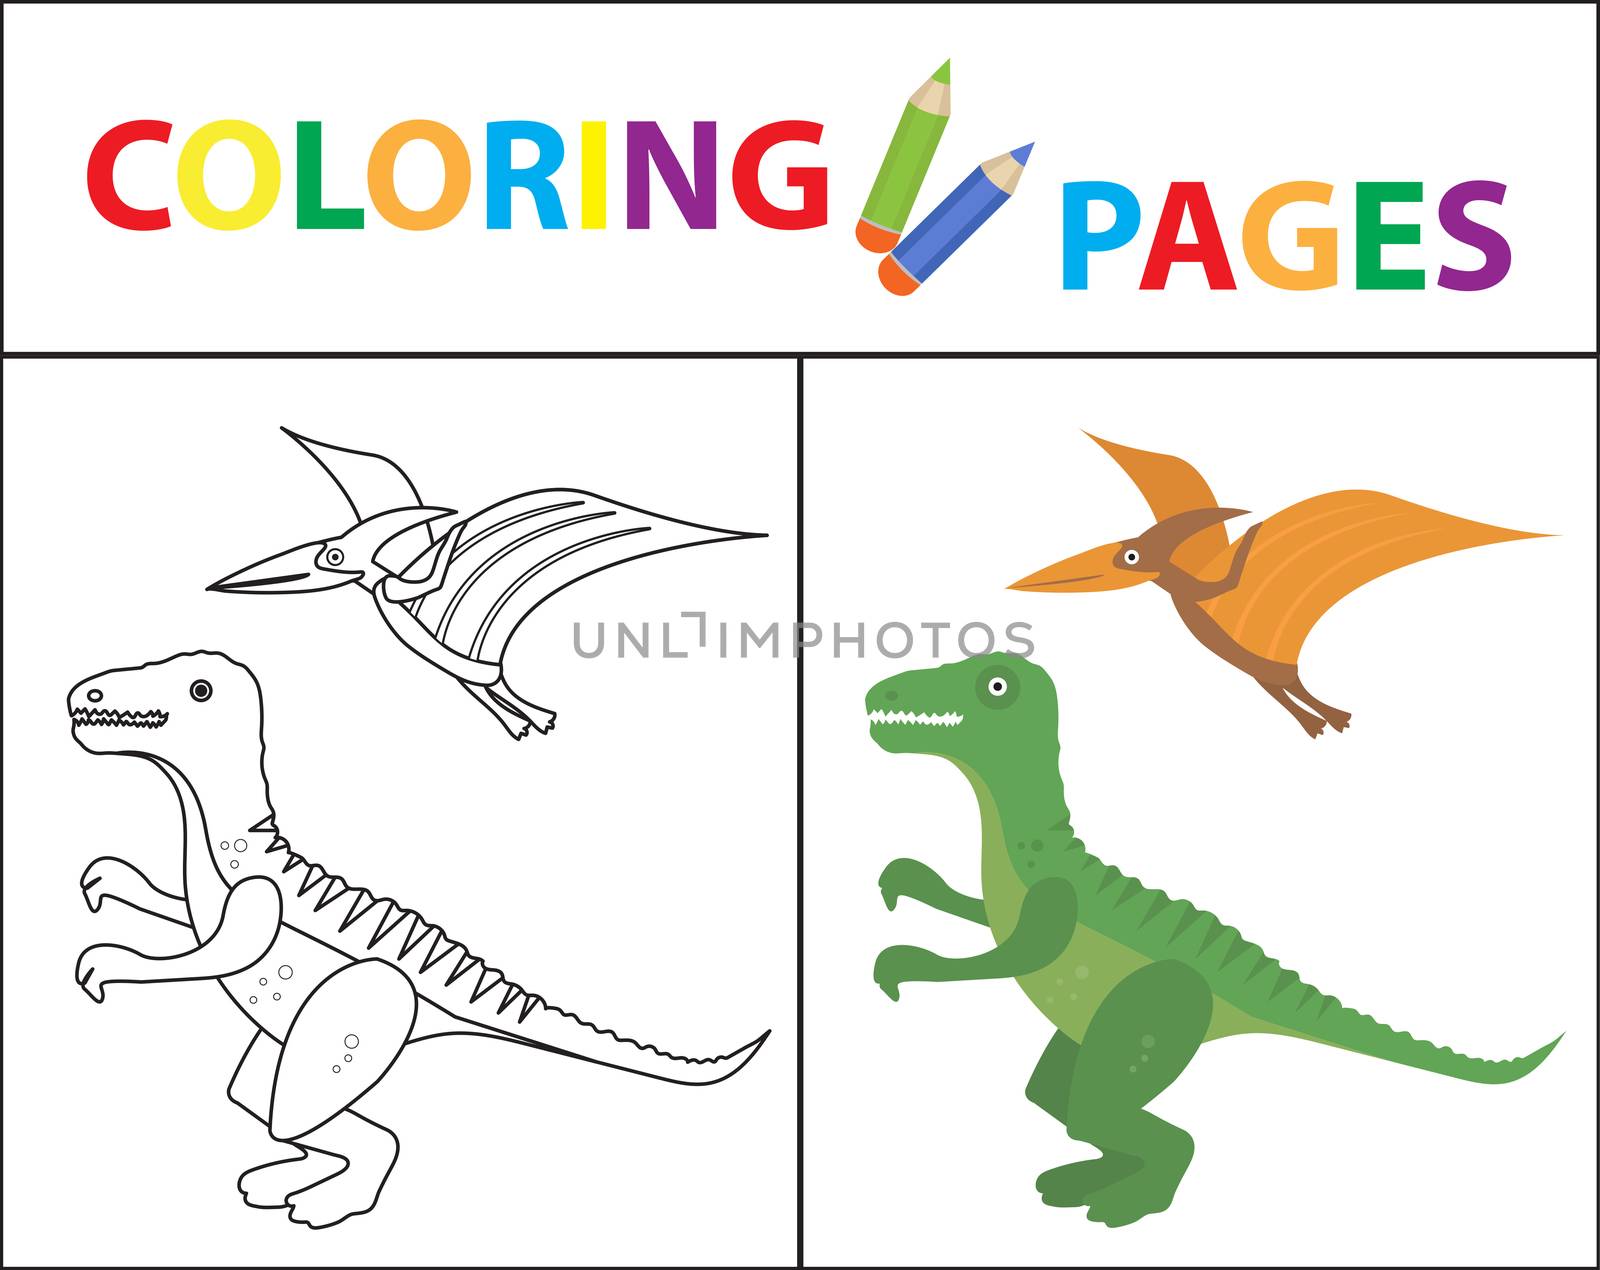 Coloring book page for kids. Dinosaurs set. Sketch outline and color version. Childrens education. illustration by lucia_fox